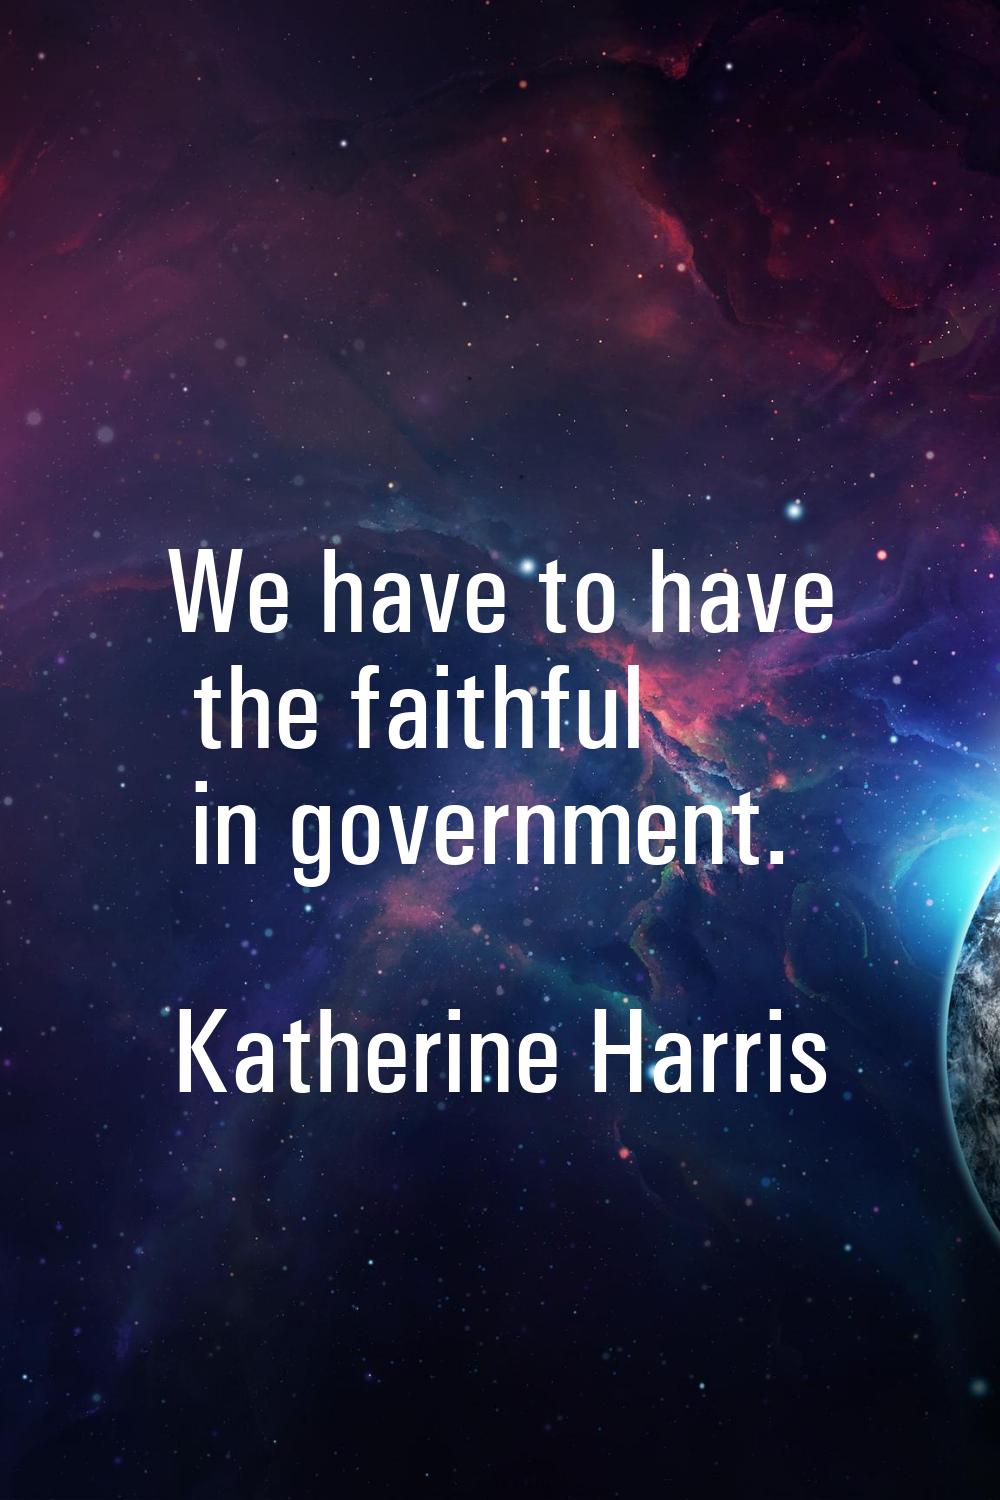 We have to have the faithful in government.